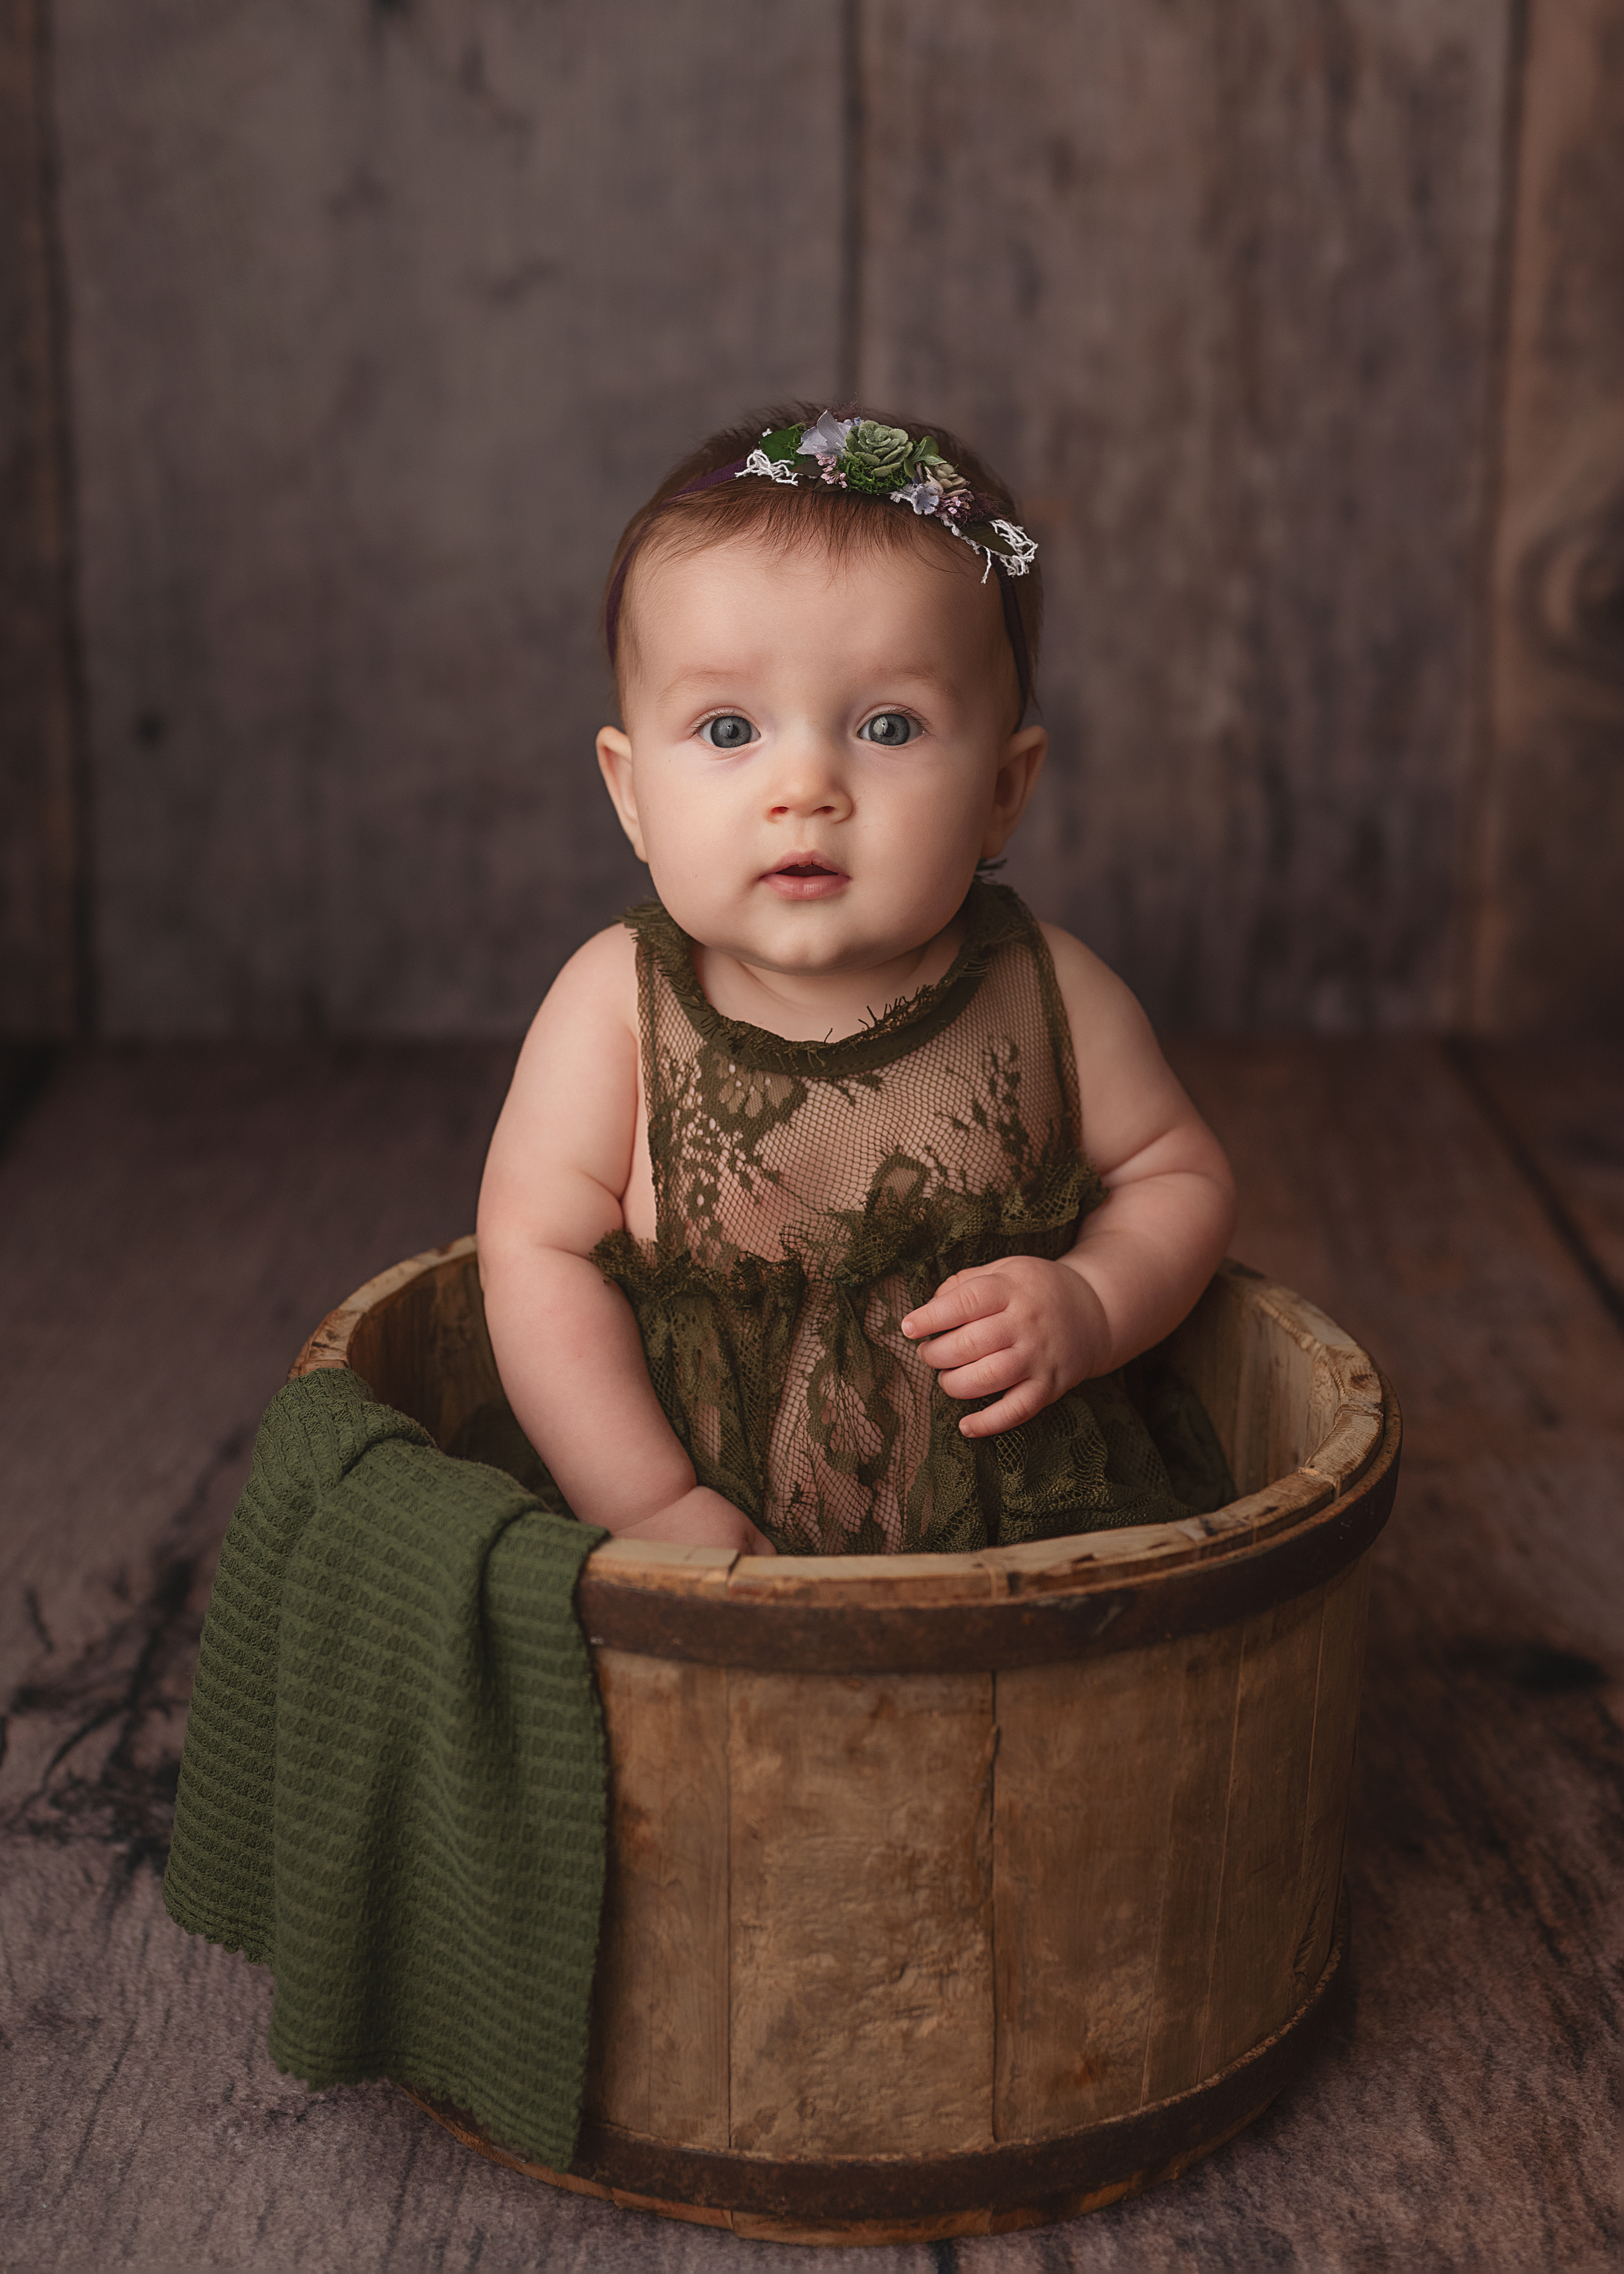 grand rapids baby photo session sitter baby girl in green dress smiling